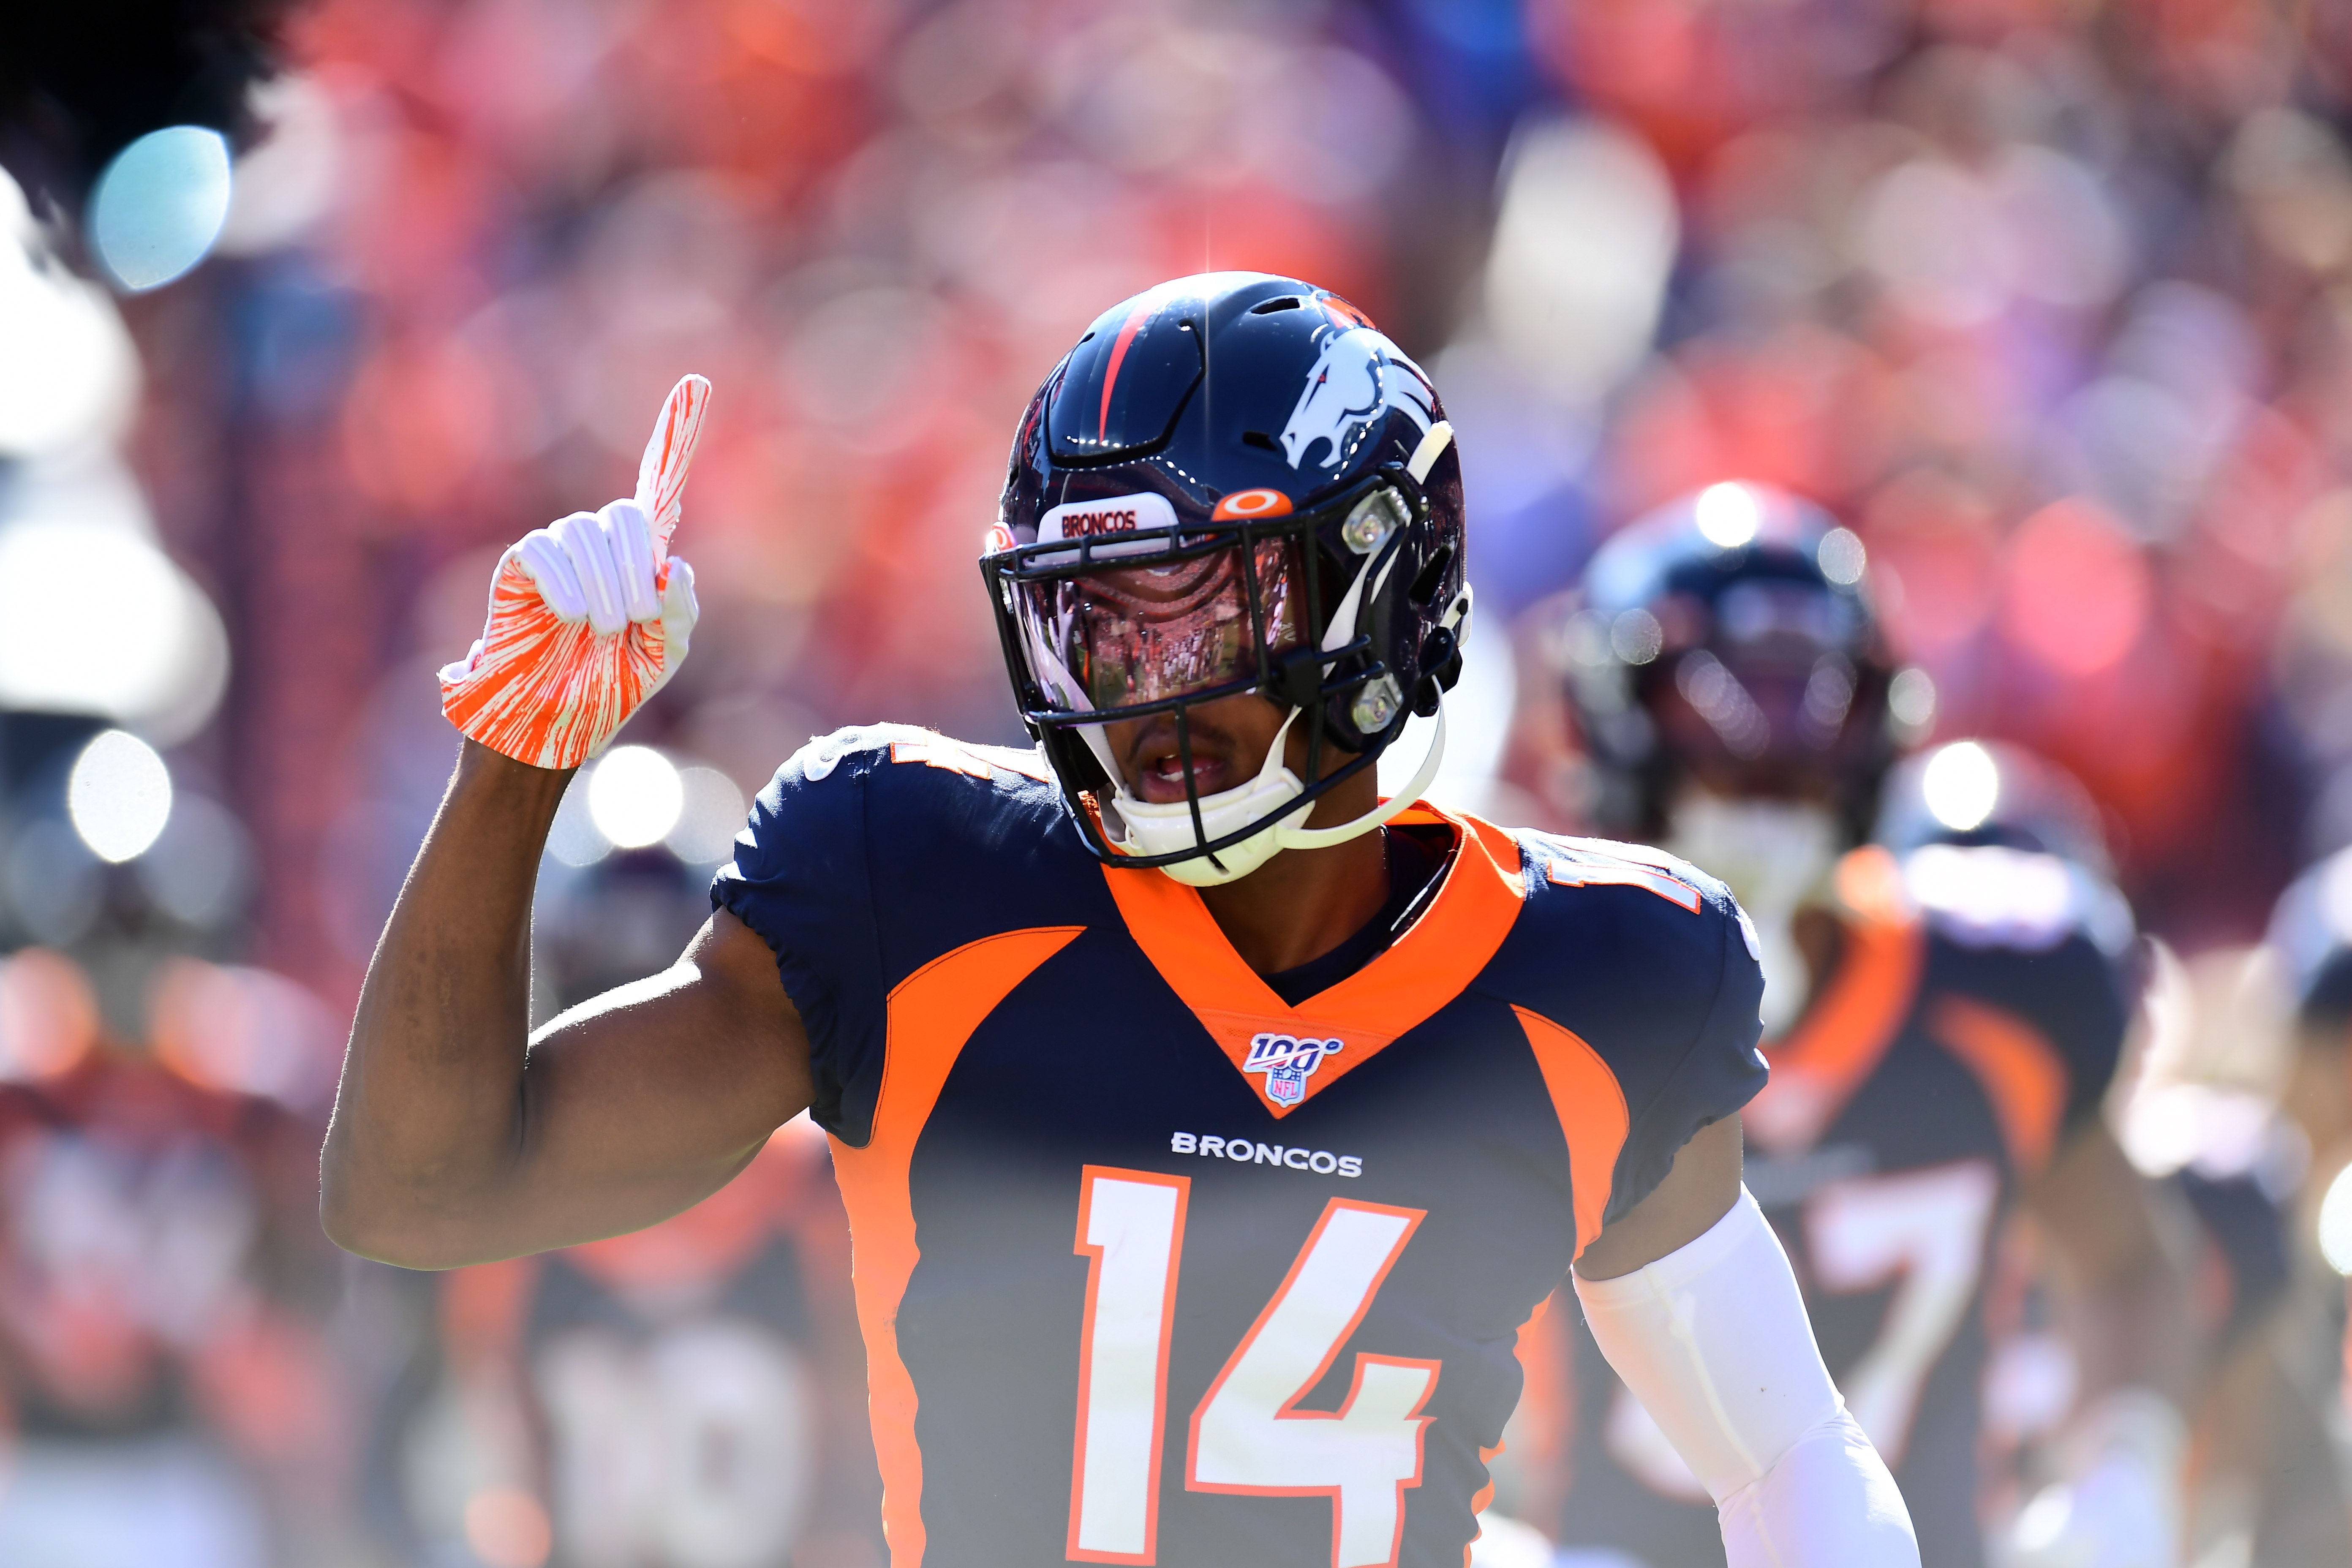 PFF Rankings: The NFL's top 25 wide receivers ahead of the 2020 NFL season, NFL News, Rankings and Statistics